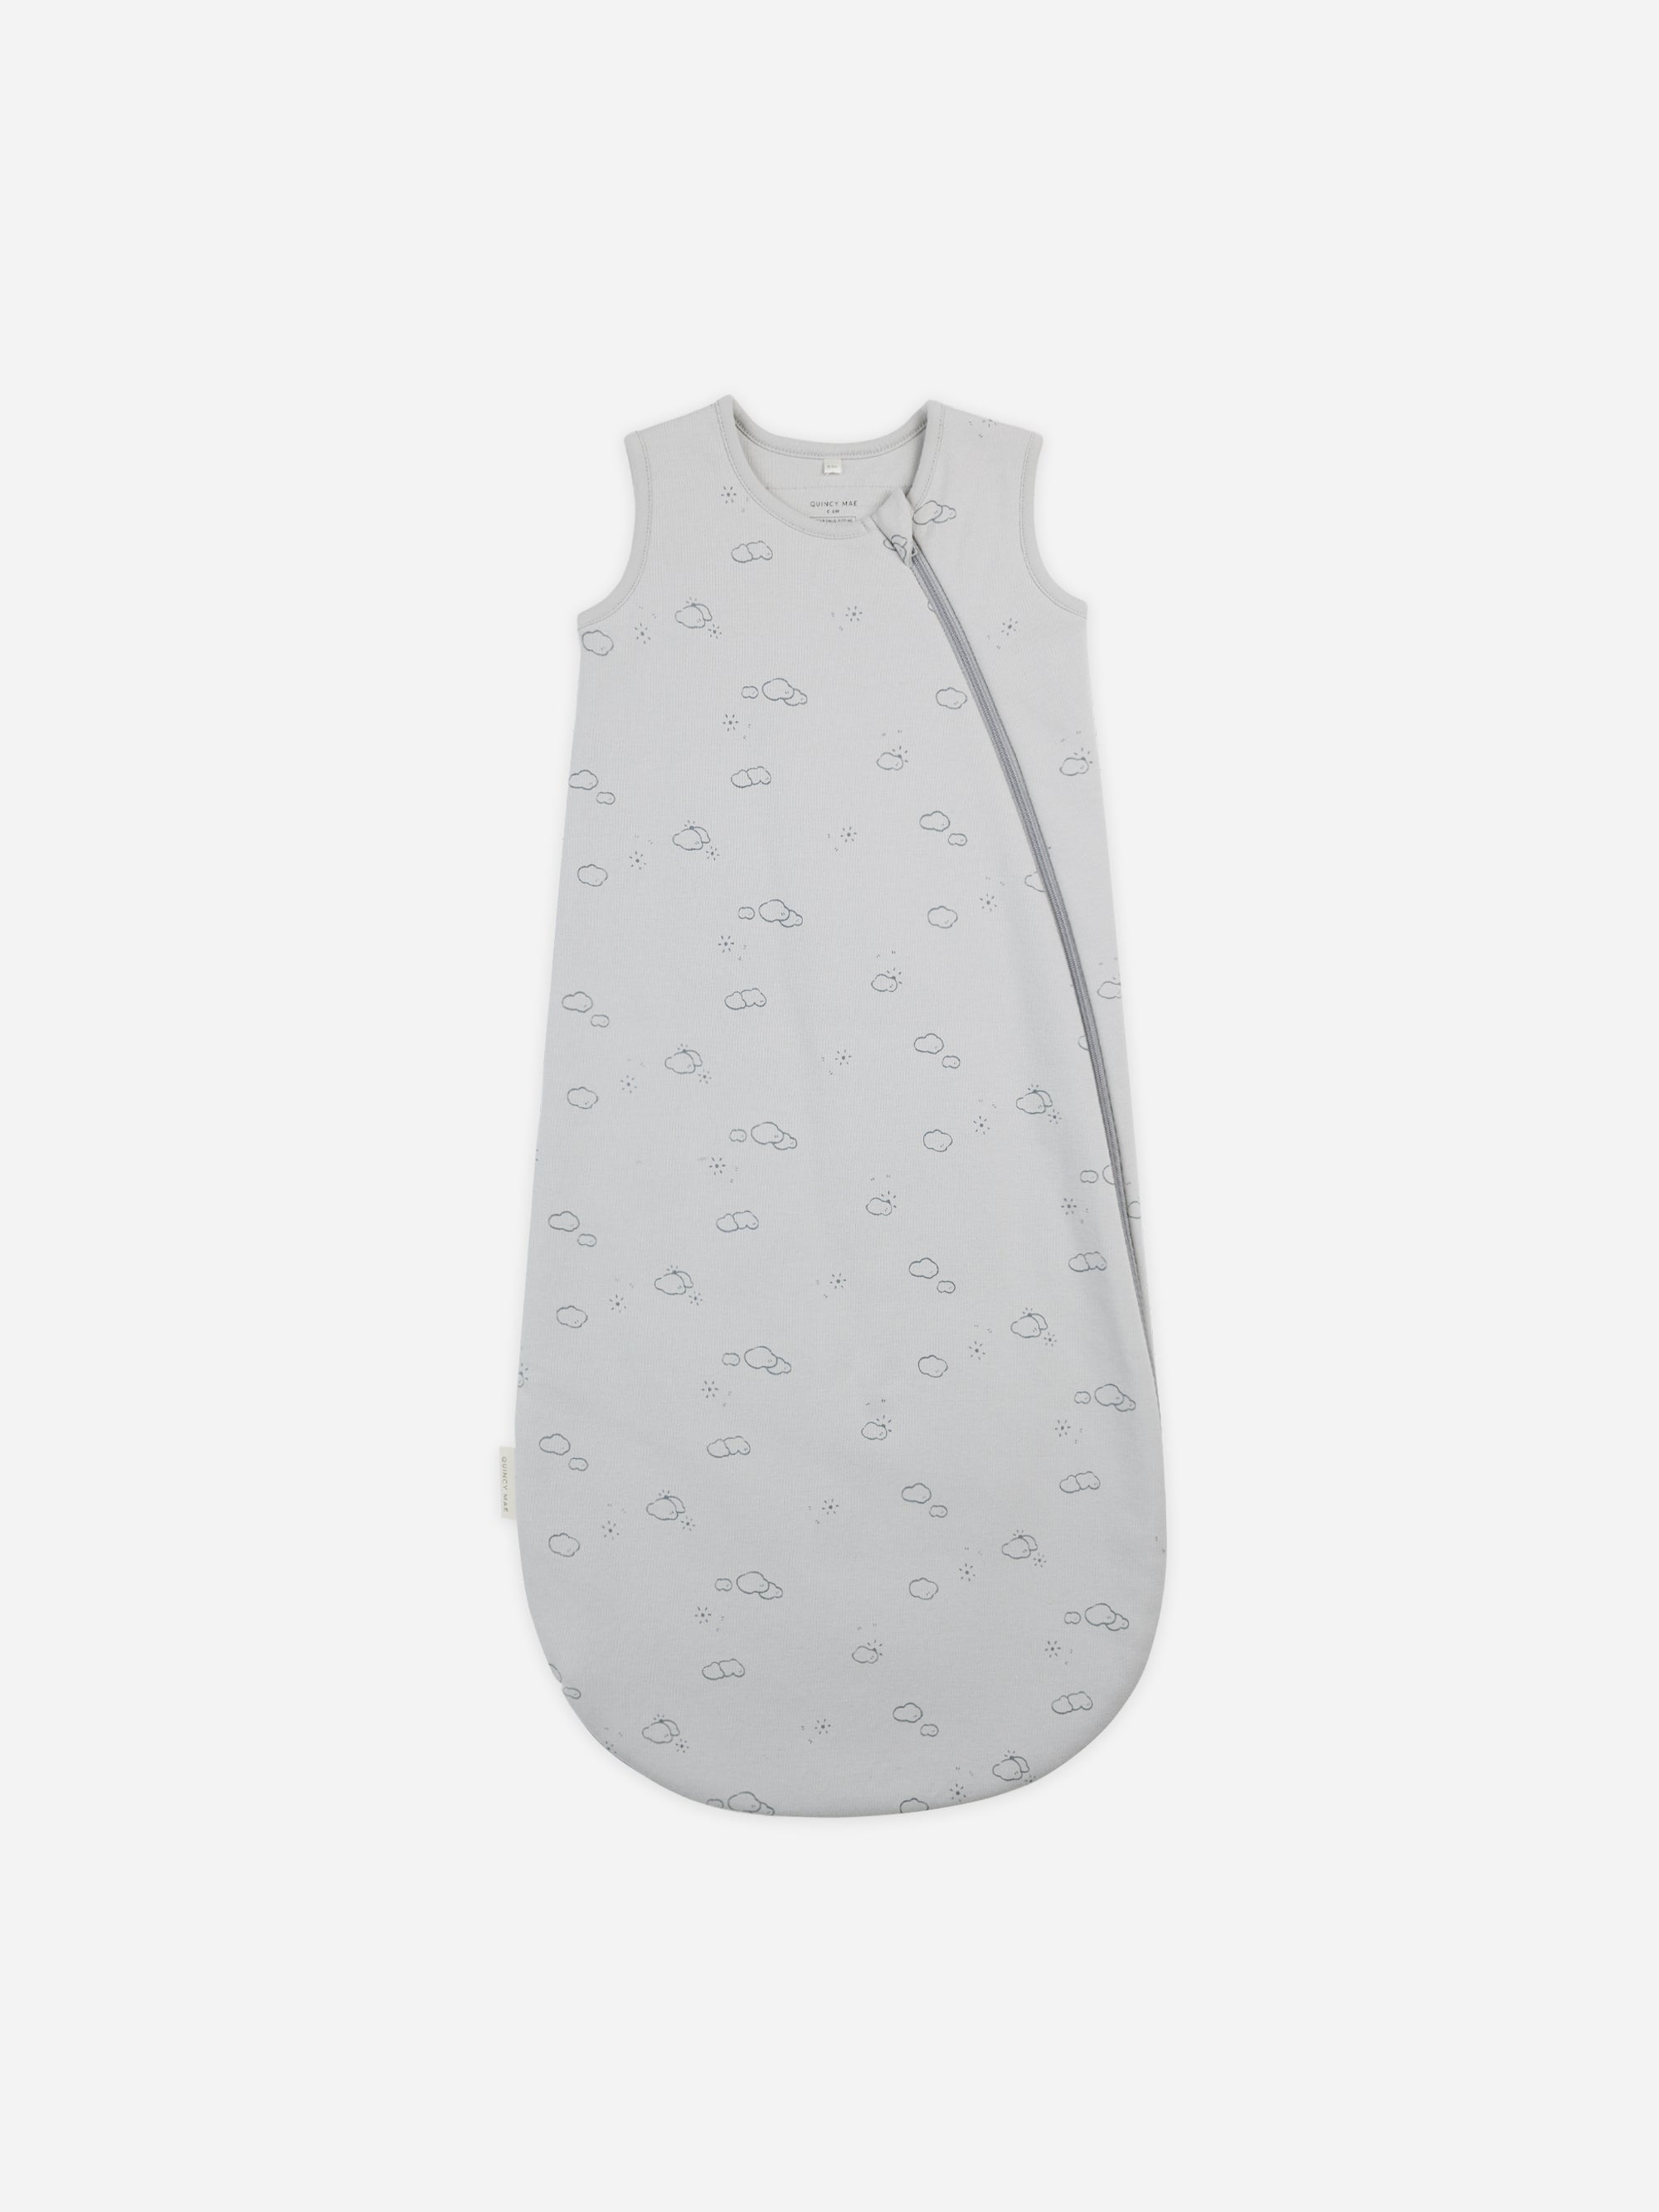 Jersey Sleep Bag || Sunny Day - Rylee + Cru | Kids Clothes | Trendy Baby Clothes | Modern Infant Outfits |